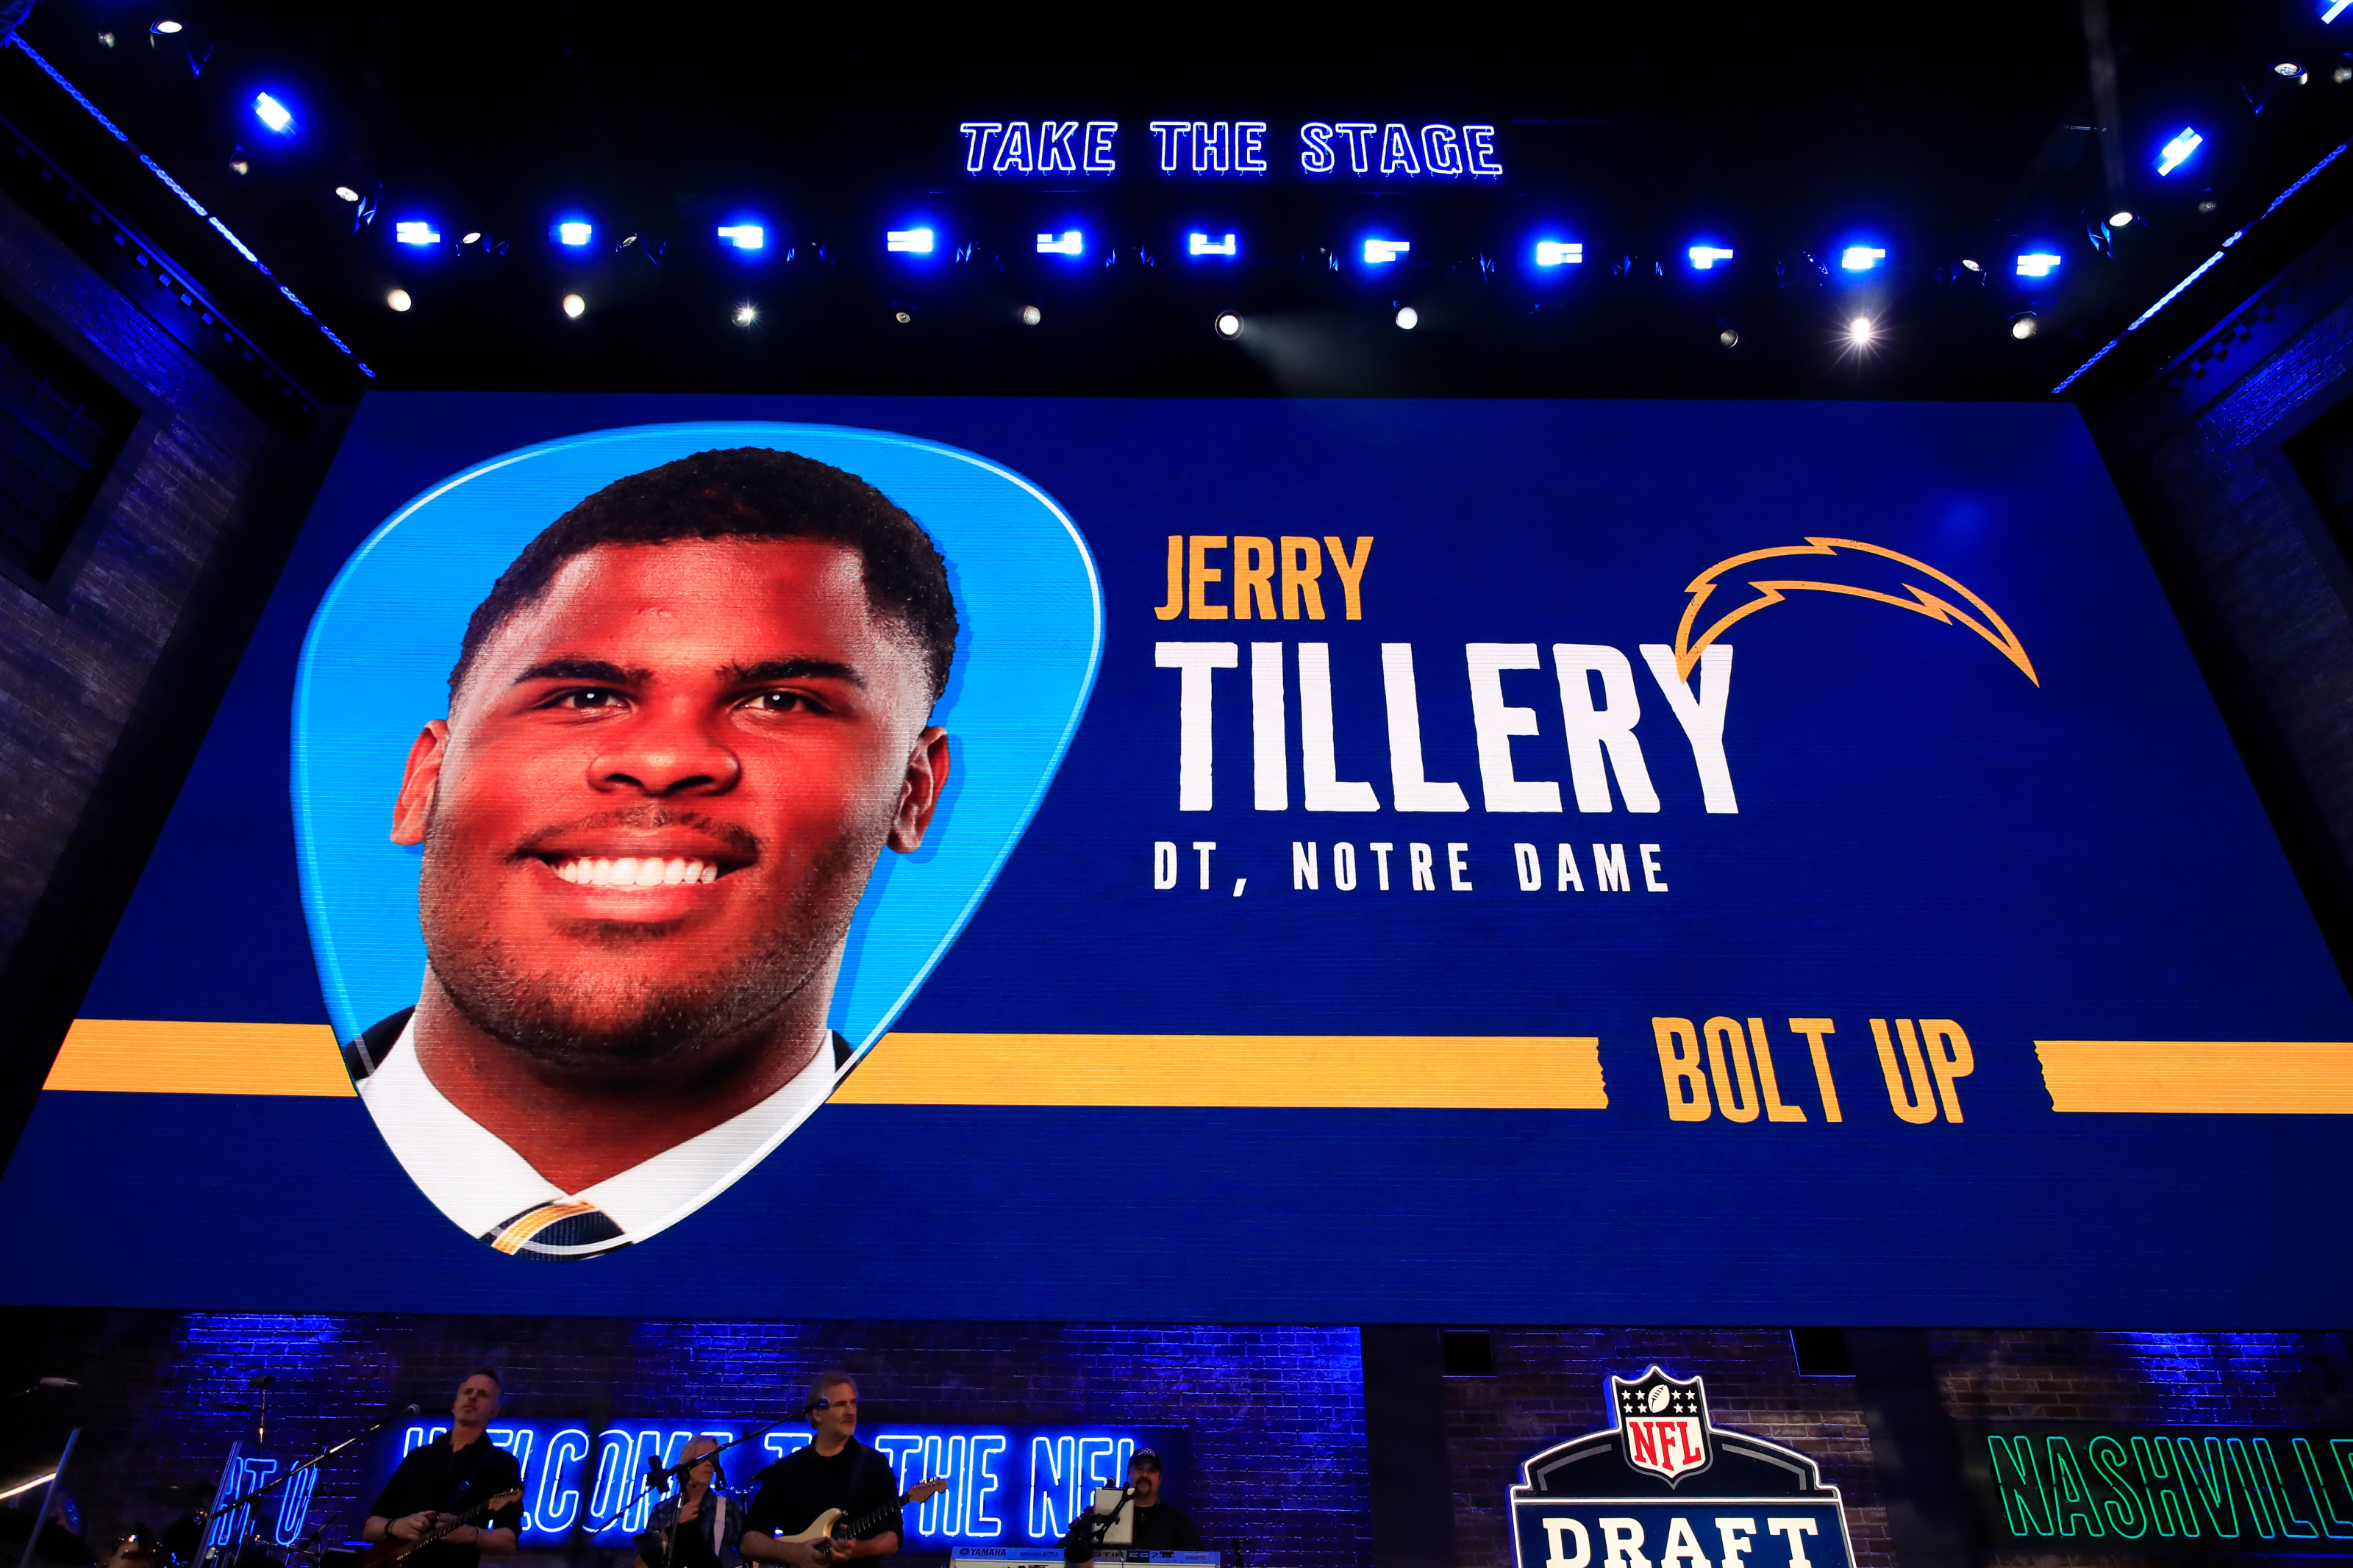 Notre Dame Football: Jerry Tillery taken by Chargers in NFL Draft